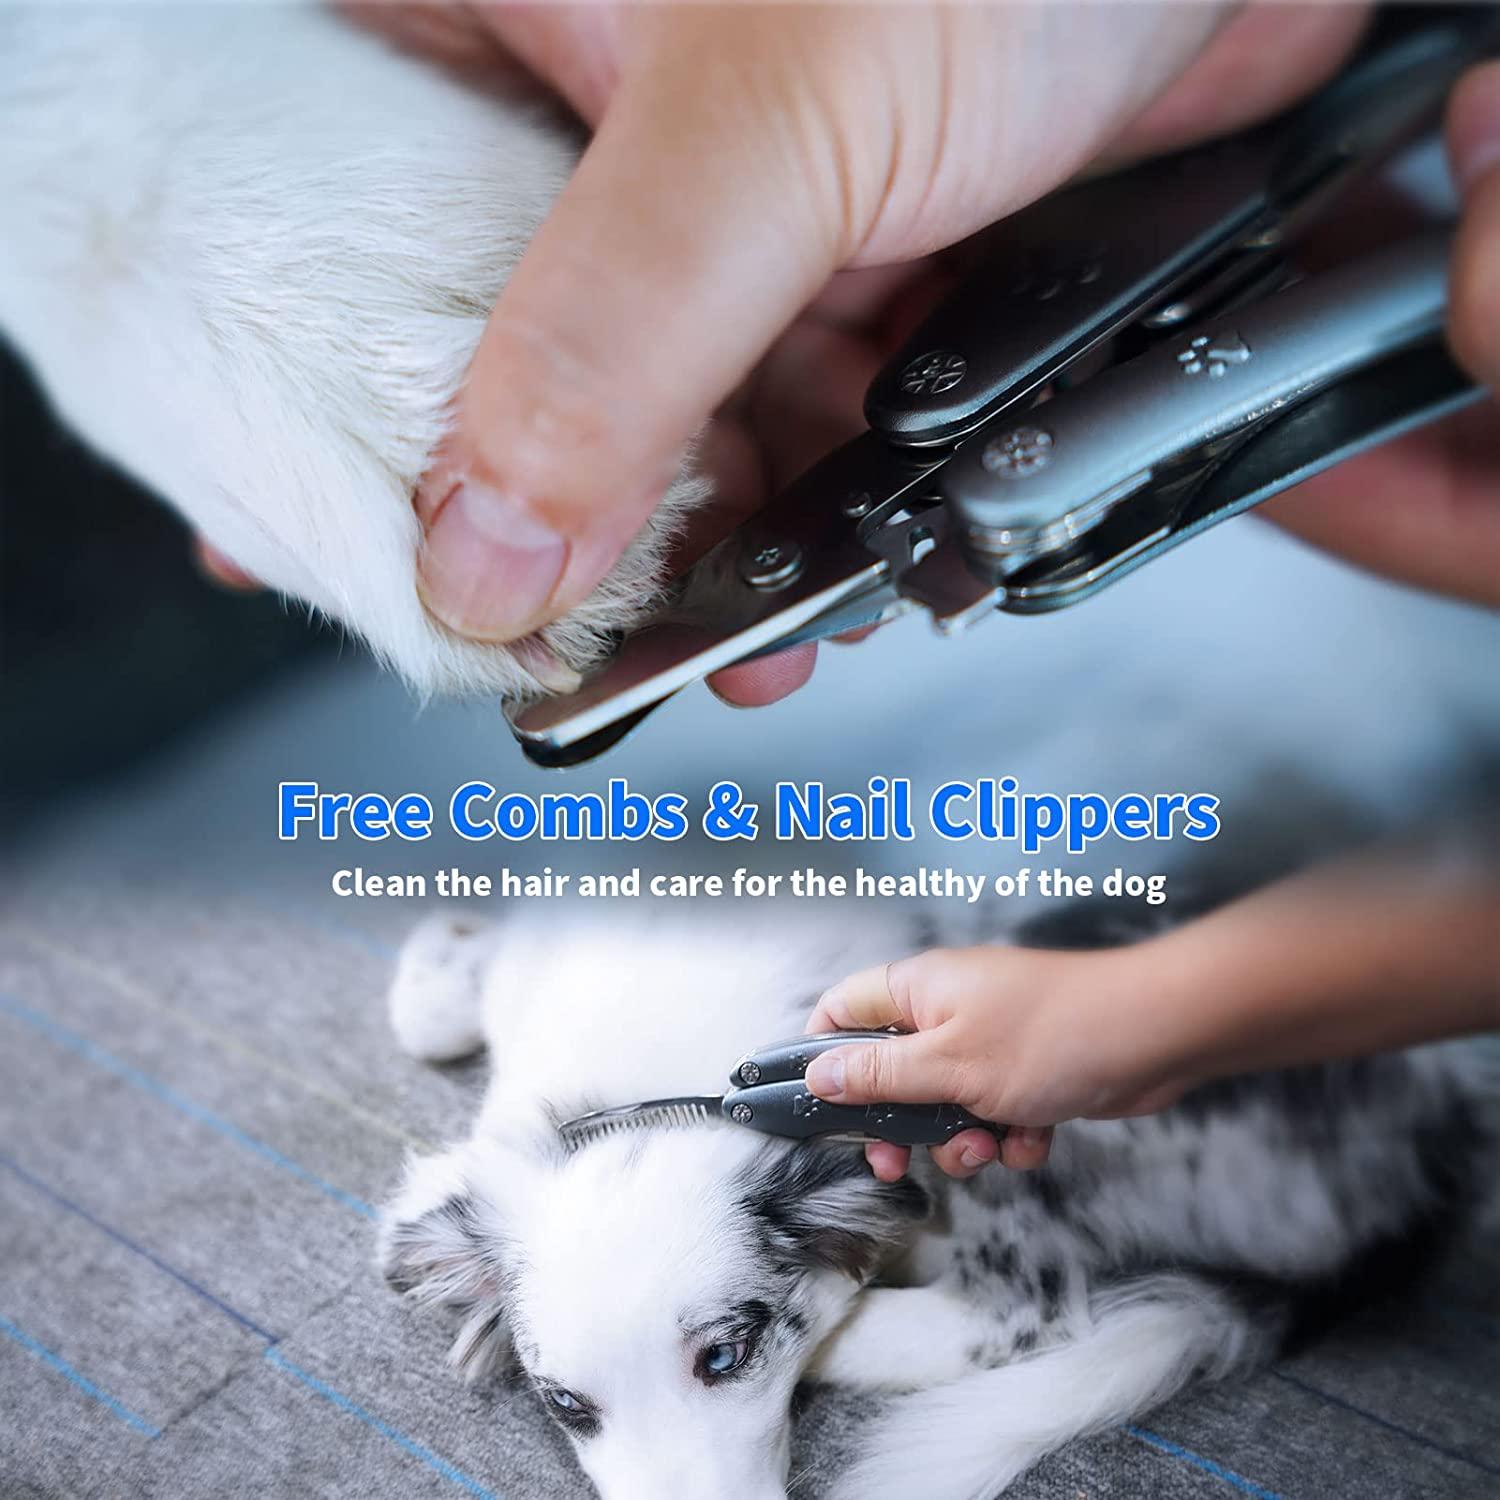 Review: Why I Love This Affordable Pet Nail Trimmer